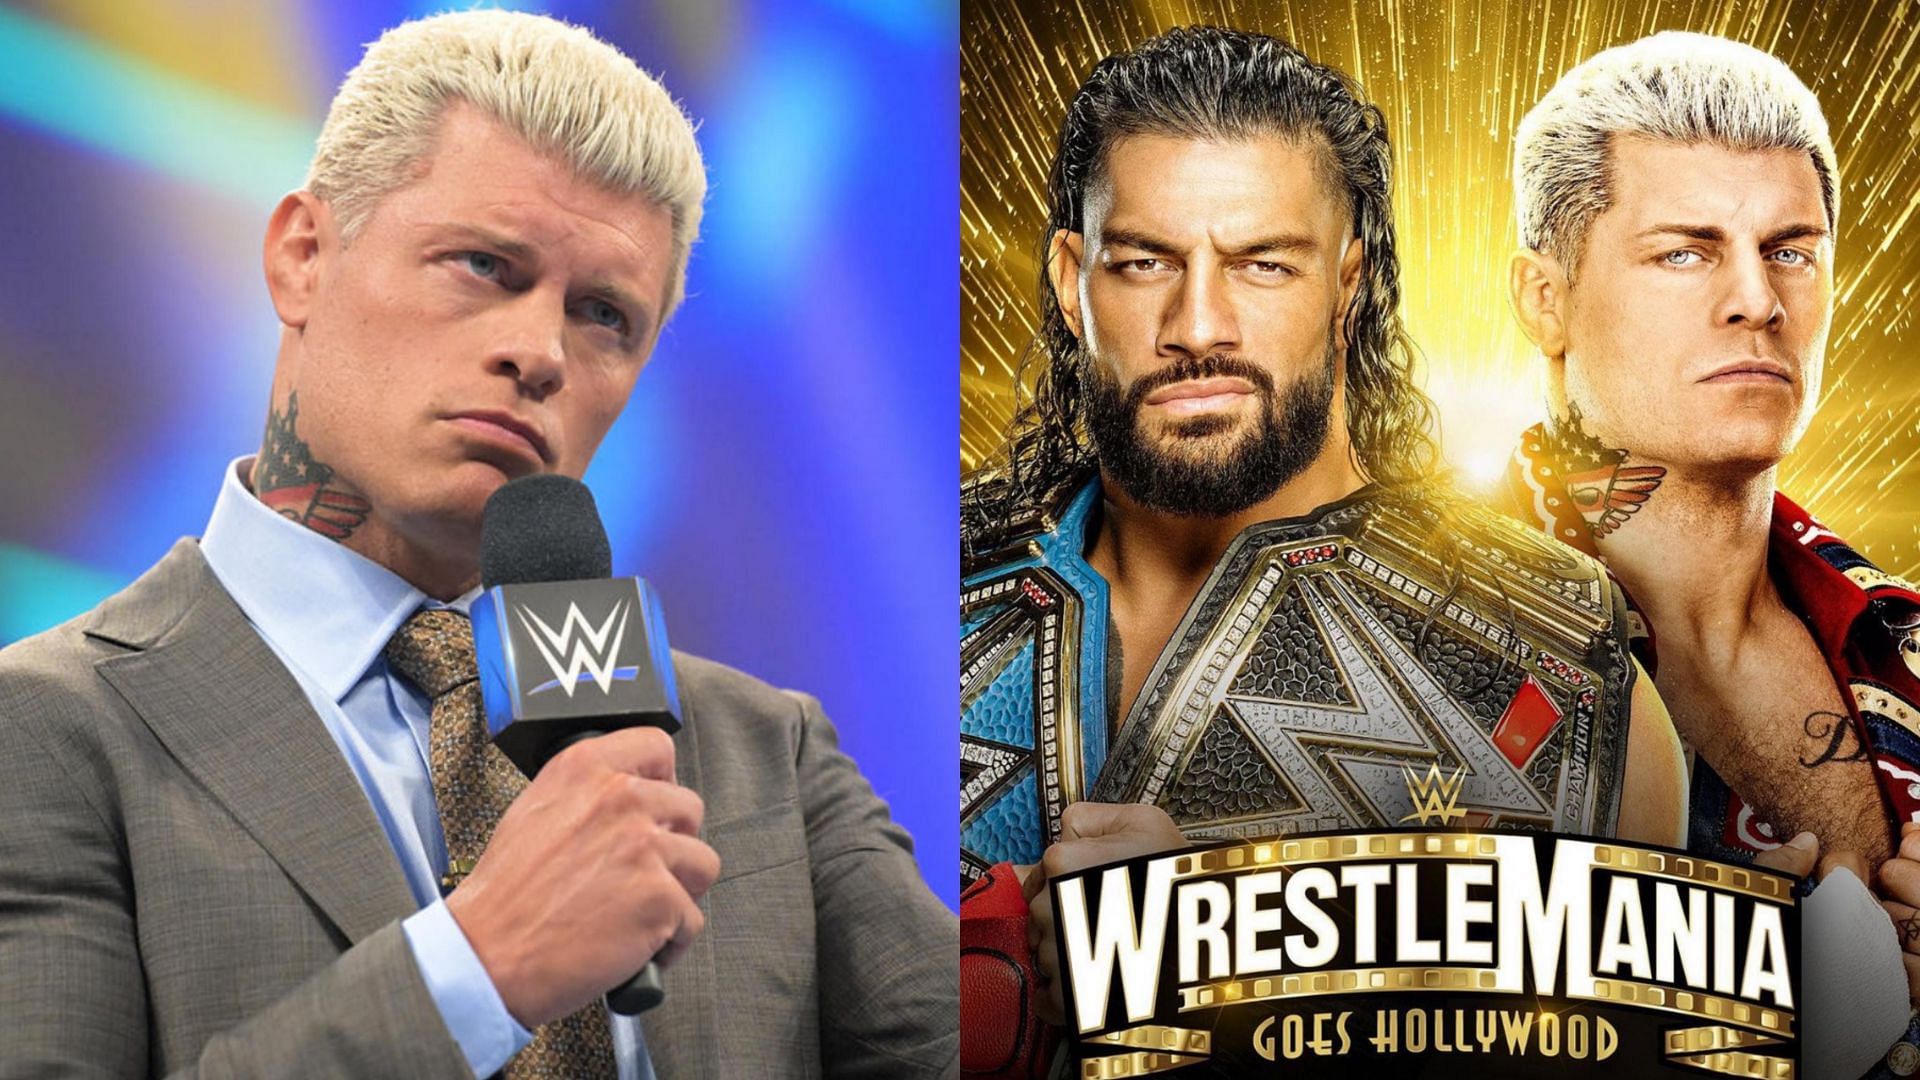 Cody Rhodes is set to face Roman Reigns at WrestleMania 39